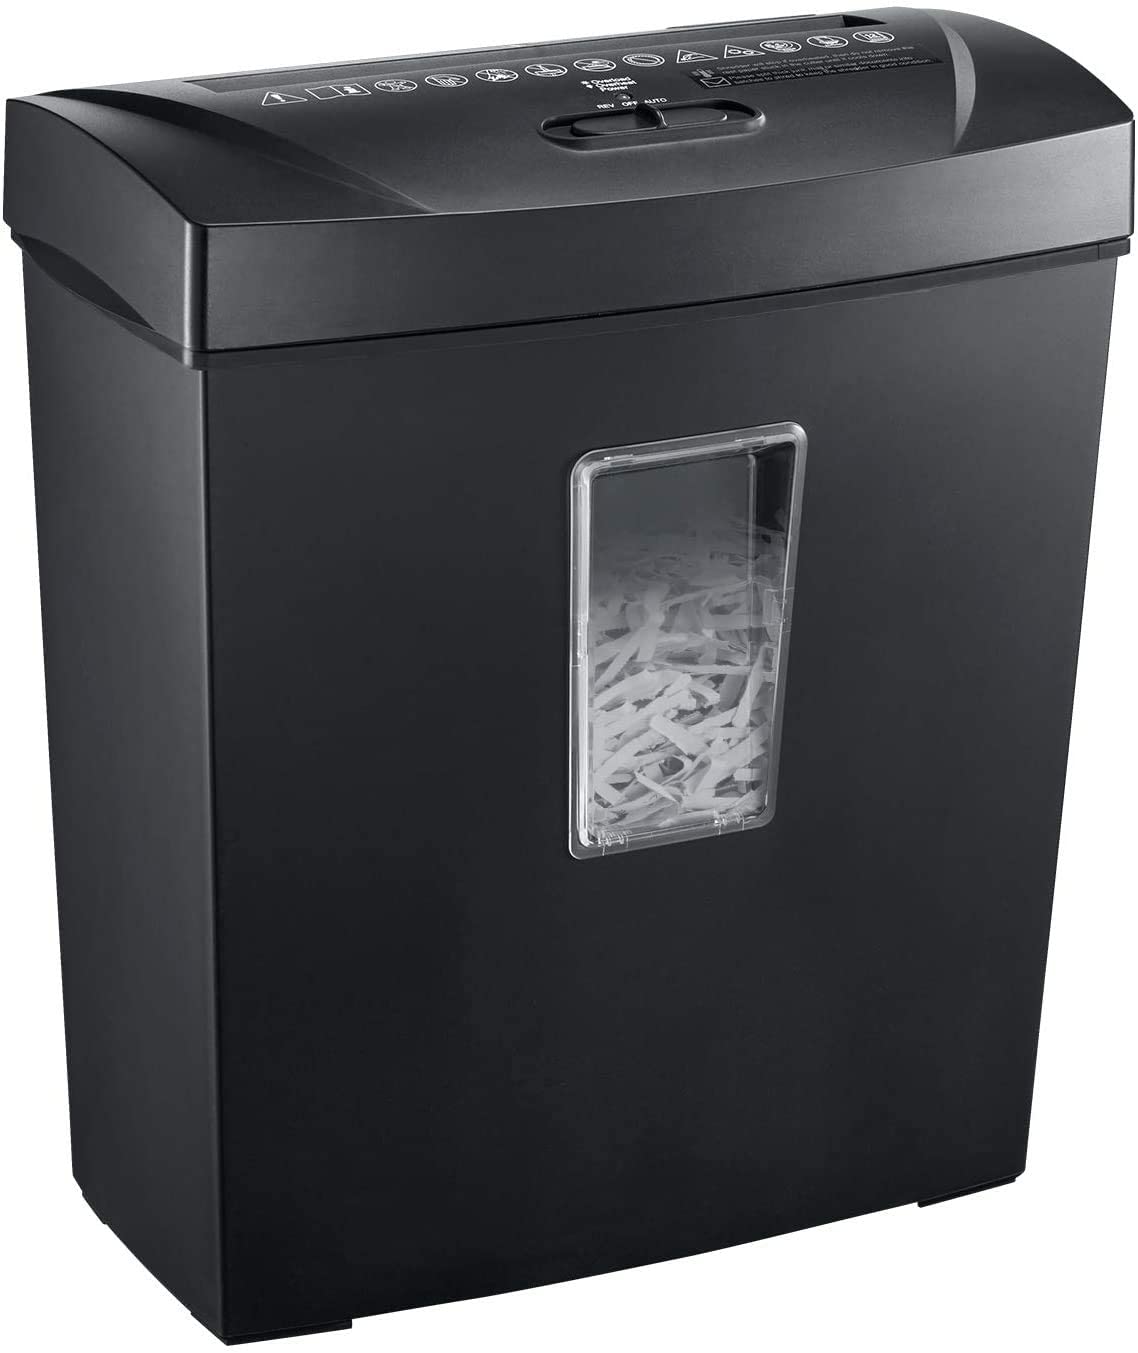 Bonsaii 12-Sheet Cross-Cut Paper Shredder P-3 High-Security for Home & Small Office Use, Shreds Credit Cards Staples Clips with 14-Litre Wastebasket, Black uk reviews